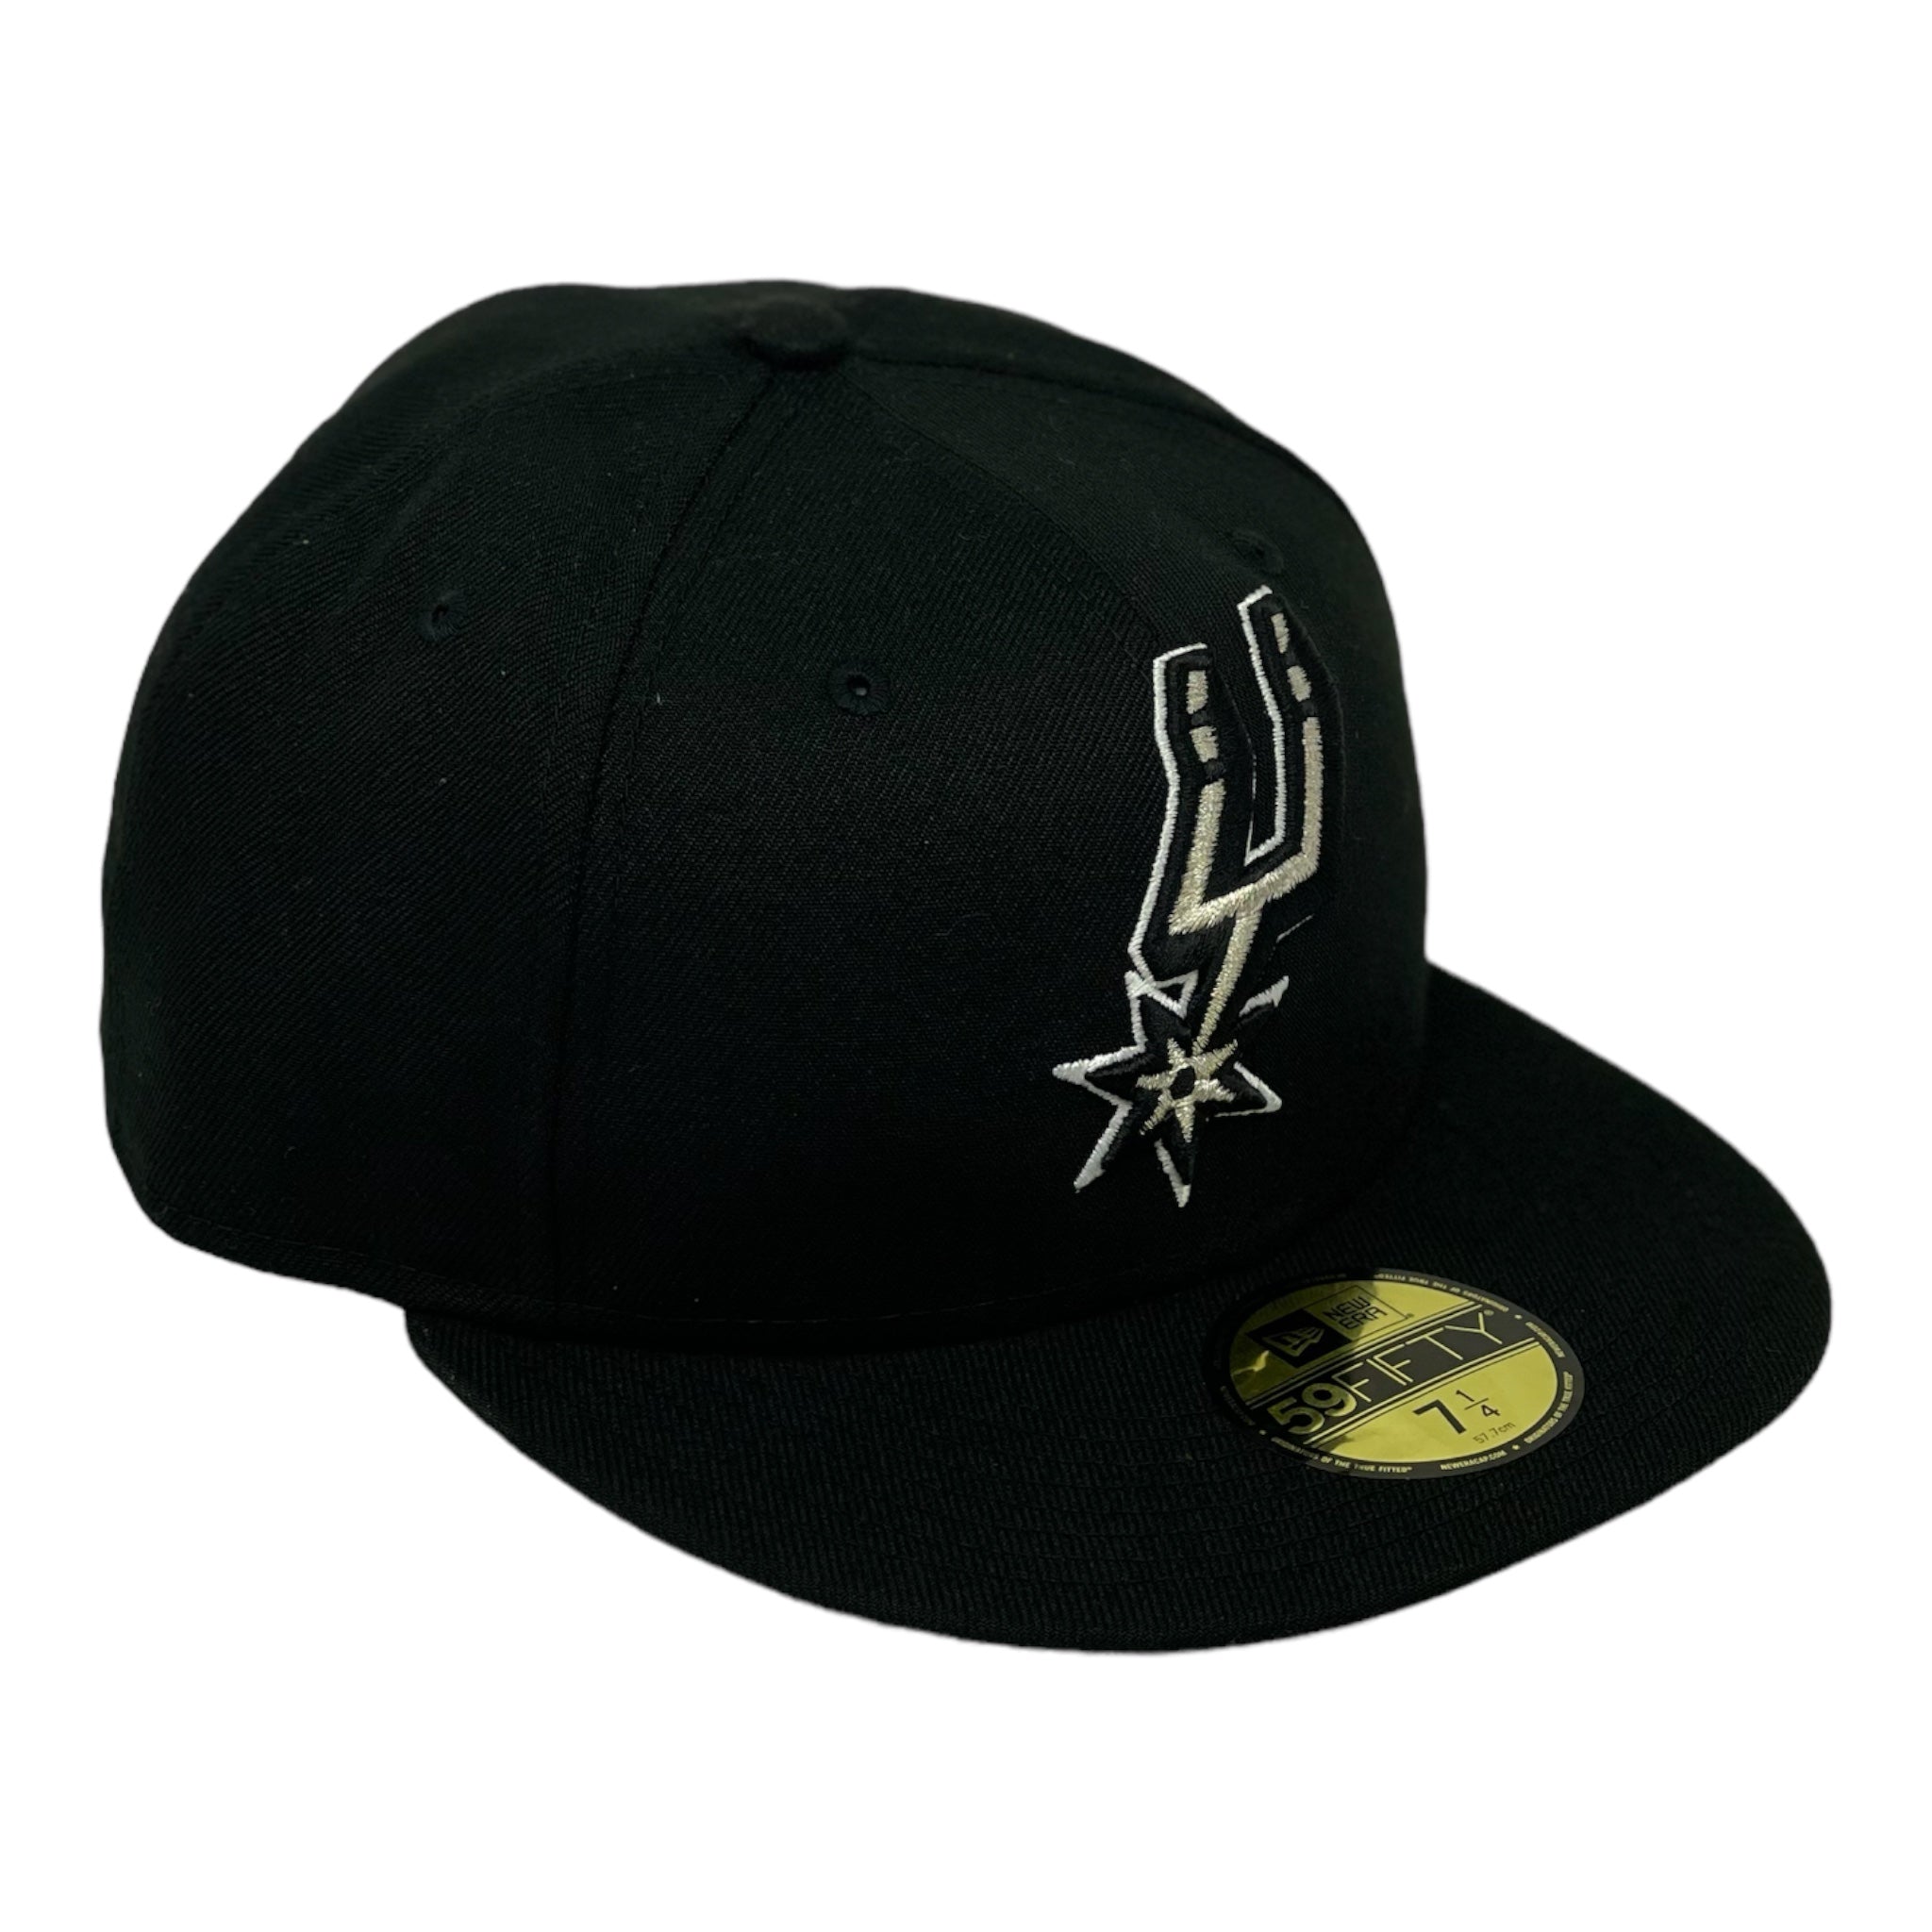 SAN ANTONIO SPURS (BLACK/ WHITE) 59FITY NEW ERA FITTED